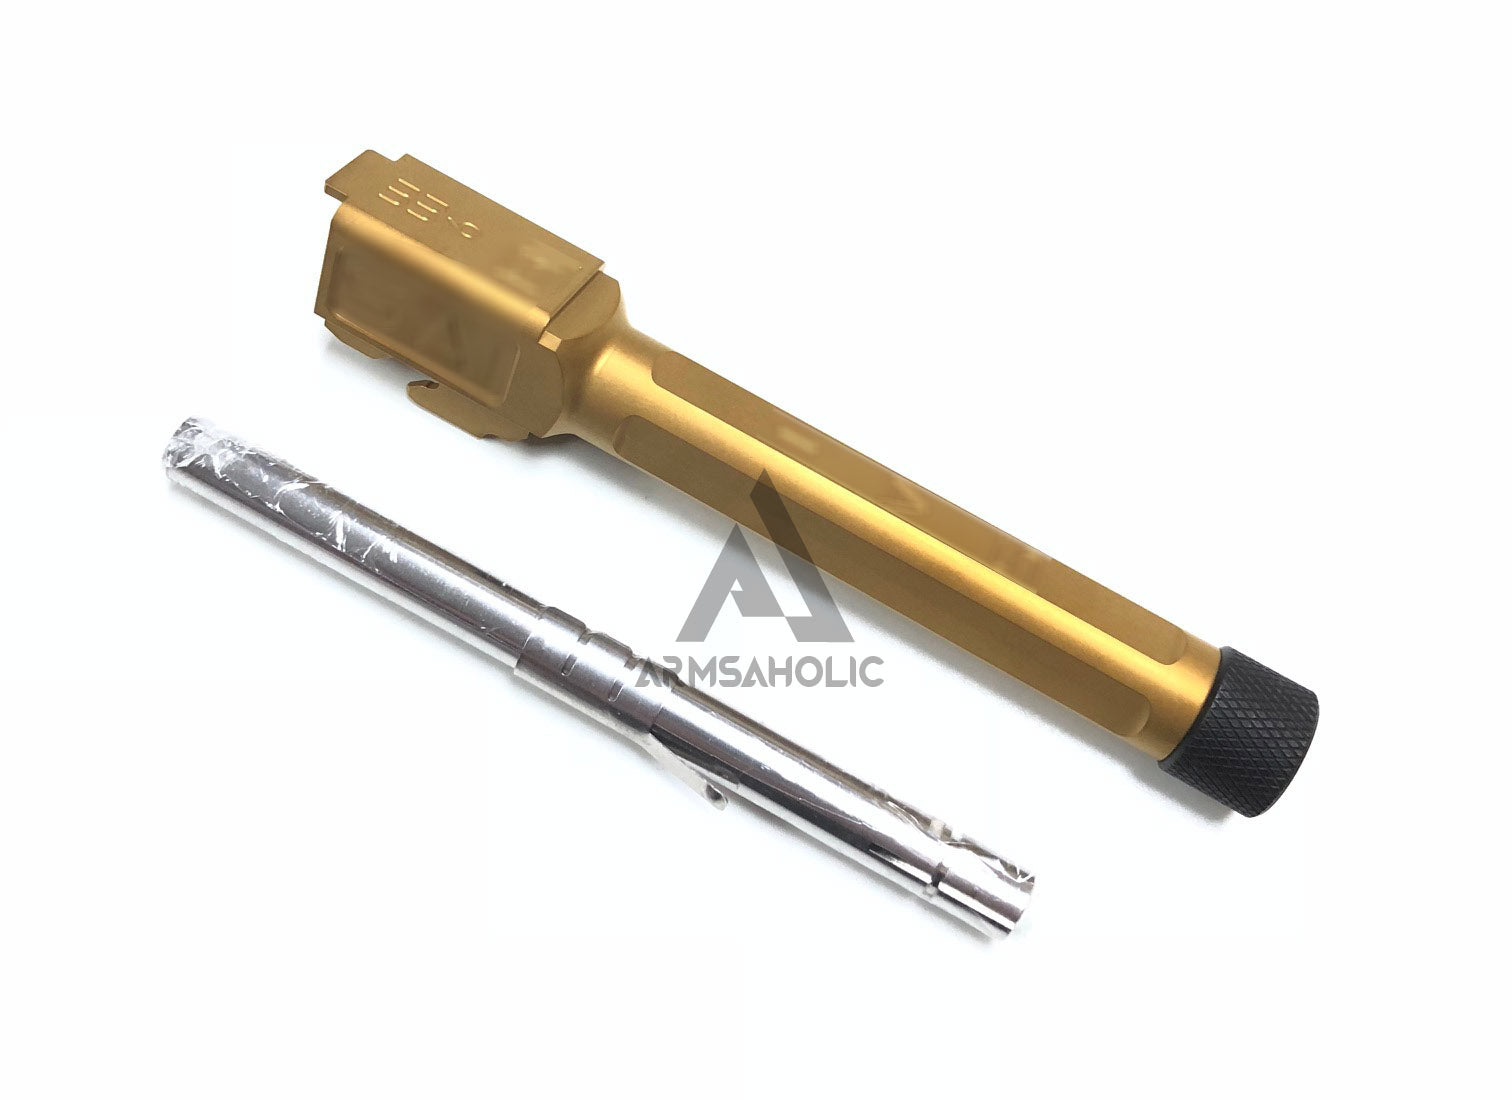 Guns Modify S-Style KM Stainless Steel Thread Outer Barrel for Marui G17 GBB (Fluted/Golden) CW 14MM